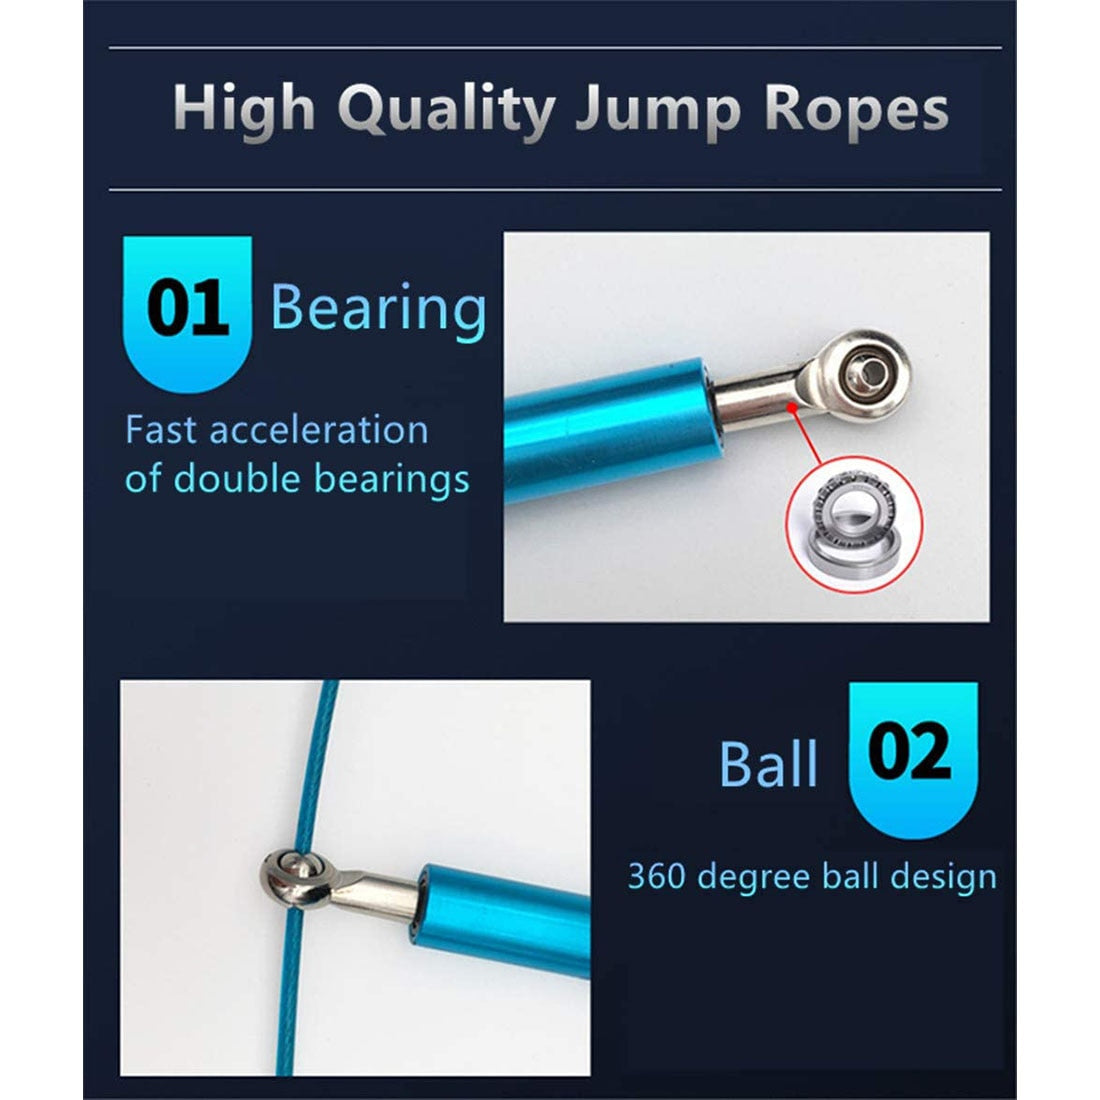 Bearing Skipping Rope Jump Crossfit Men Women Workout Equipment Steel Excercise Fitness Karate Boxing Training